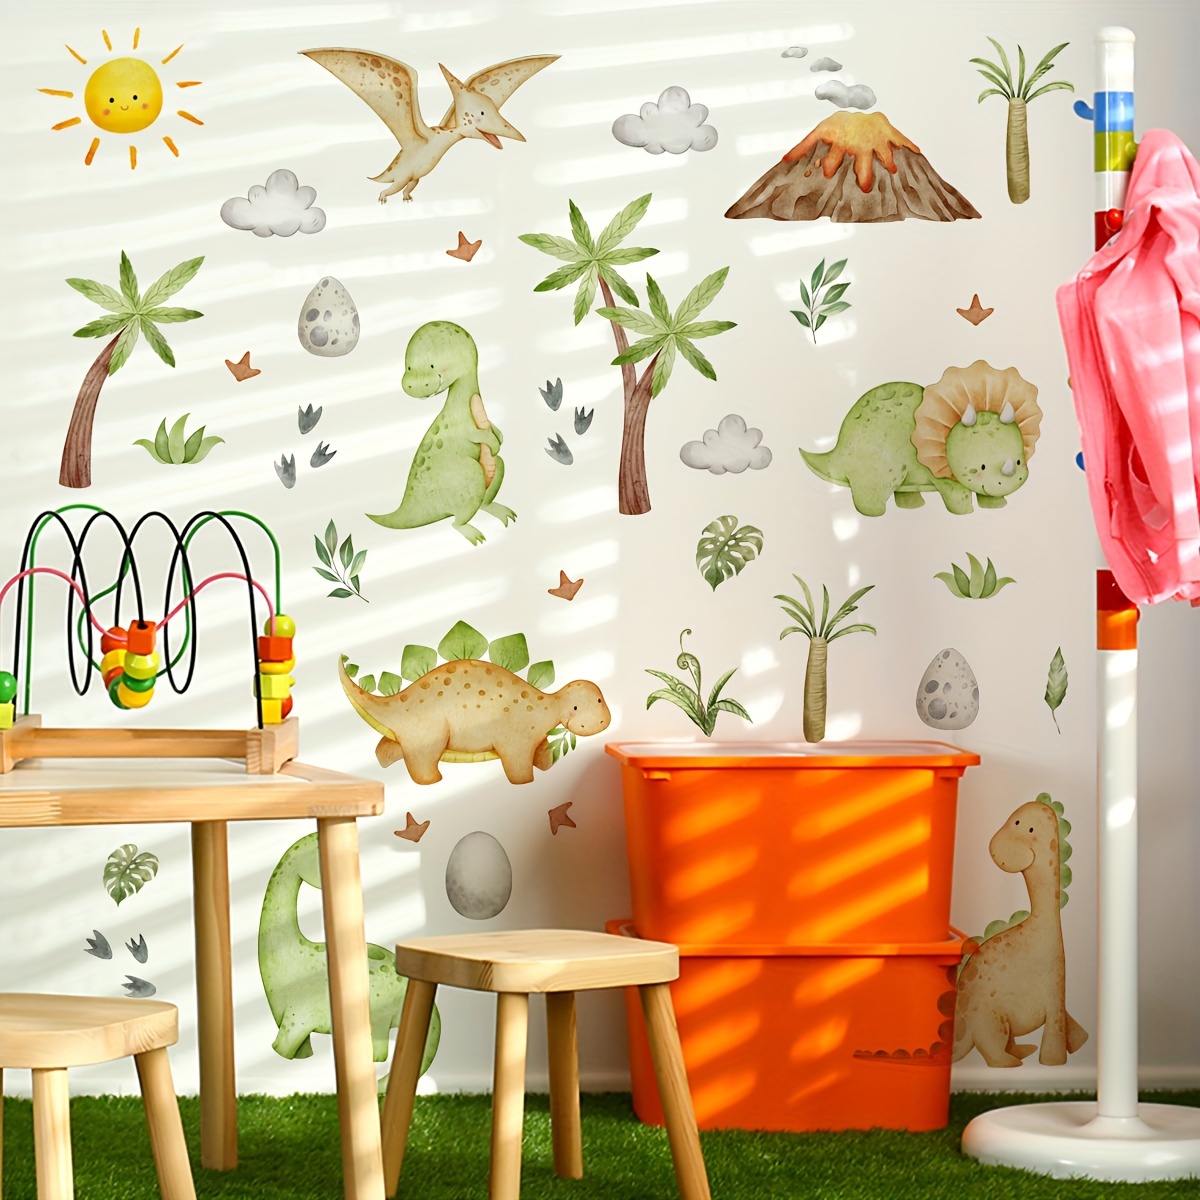 

1pc Cartoon Animal Dinosaur Sun Clouds Wall Sticker, Diy Living Room Entrance Wall Decoration Sticker, Self Adhesive Wall Decal, Aesthetic Home Decoration, Room Decor, Beautify Your Home